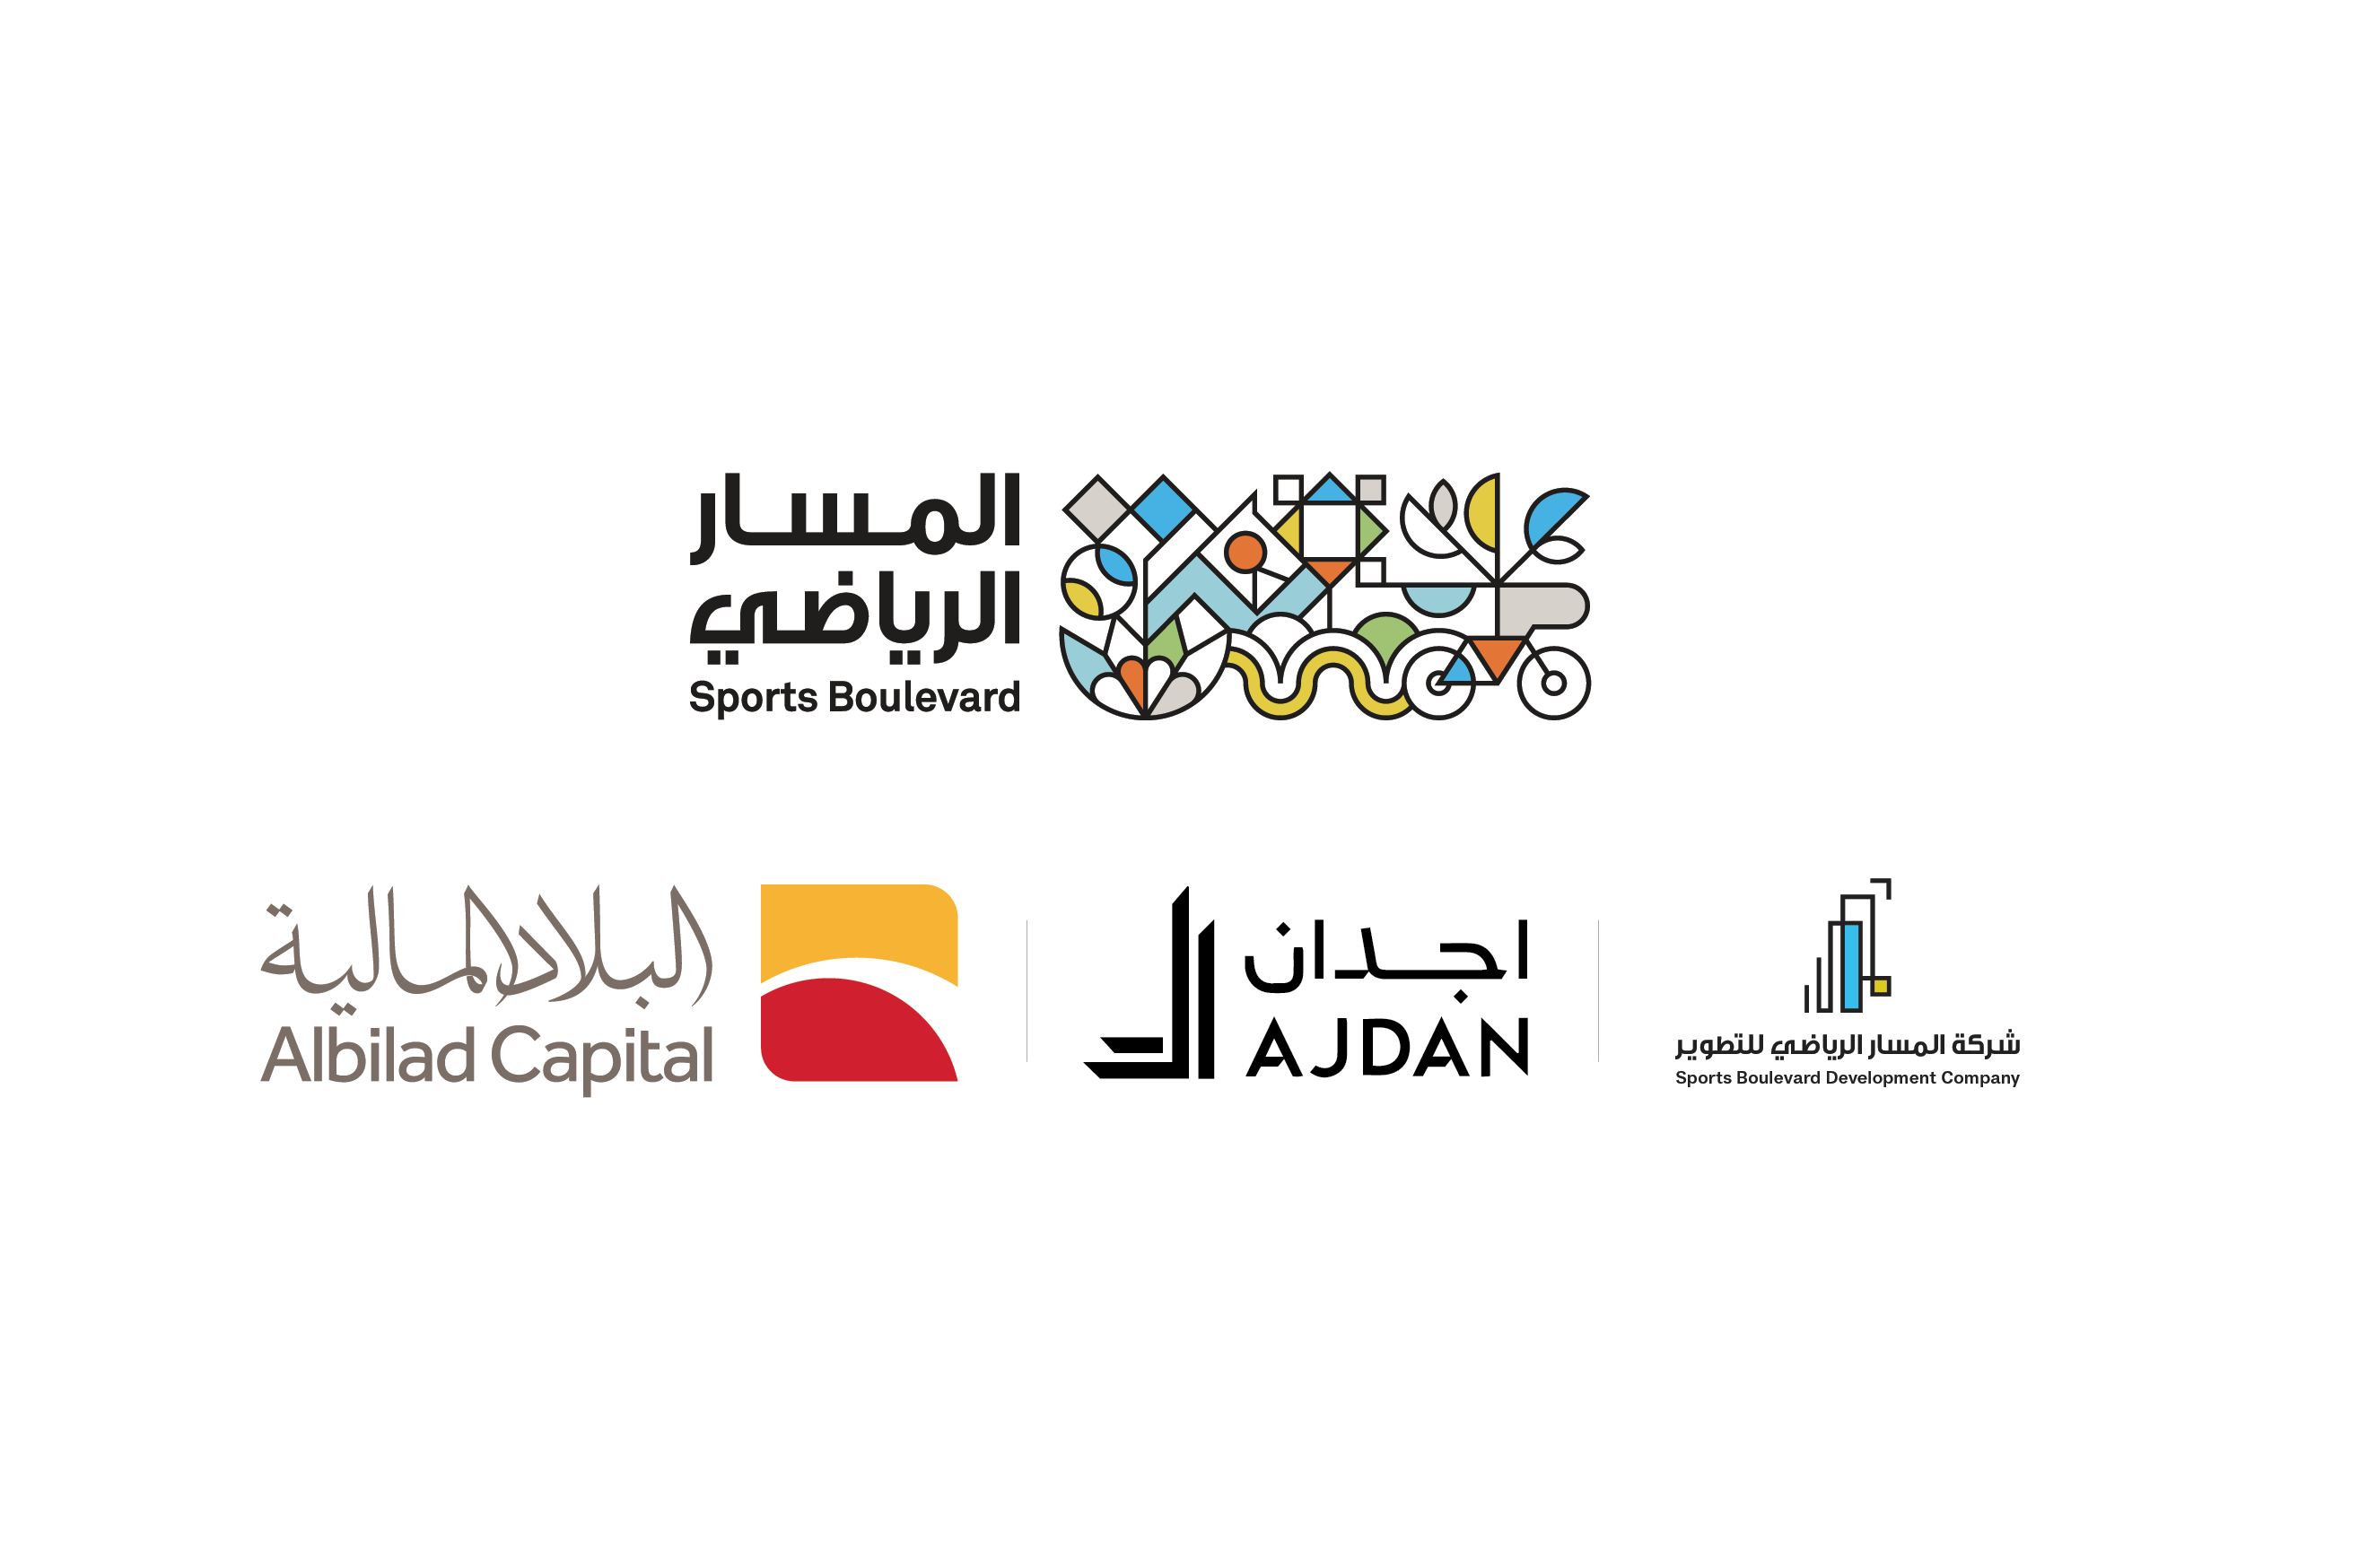 The &#8220;Sports Boulevard&#8221; Foundation has announced with Ajdan Real Estate Development Company and Albilad Capital to double the value o